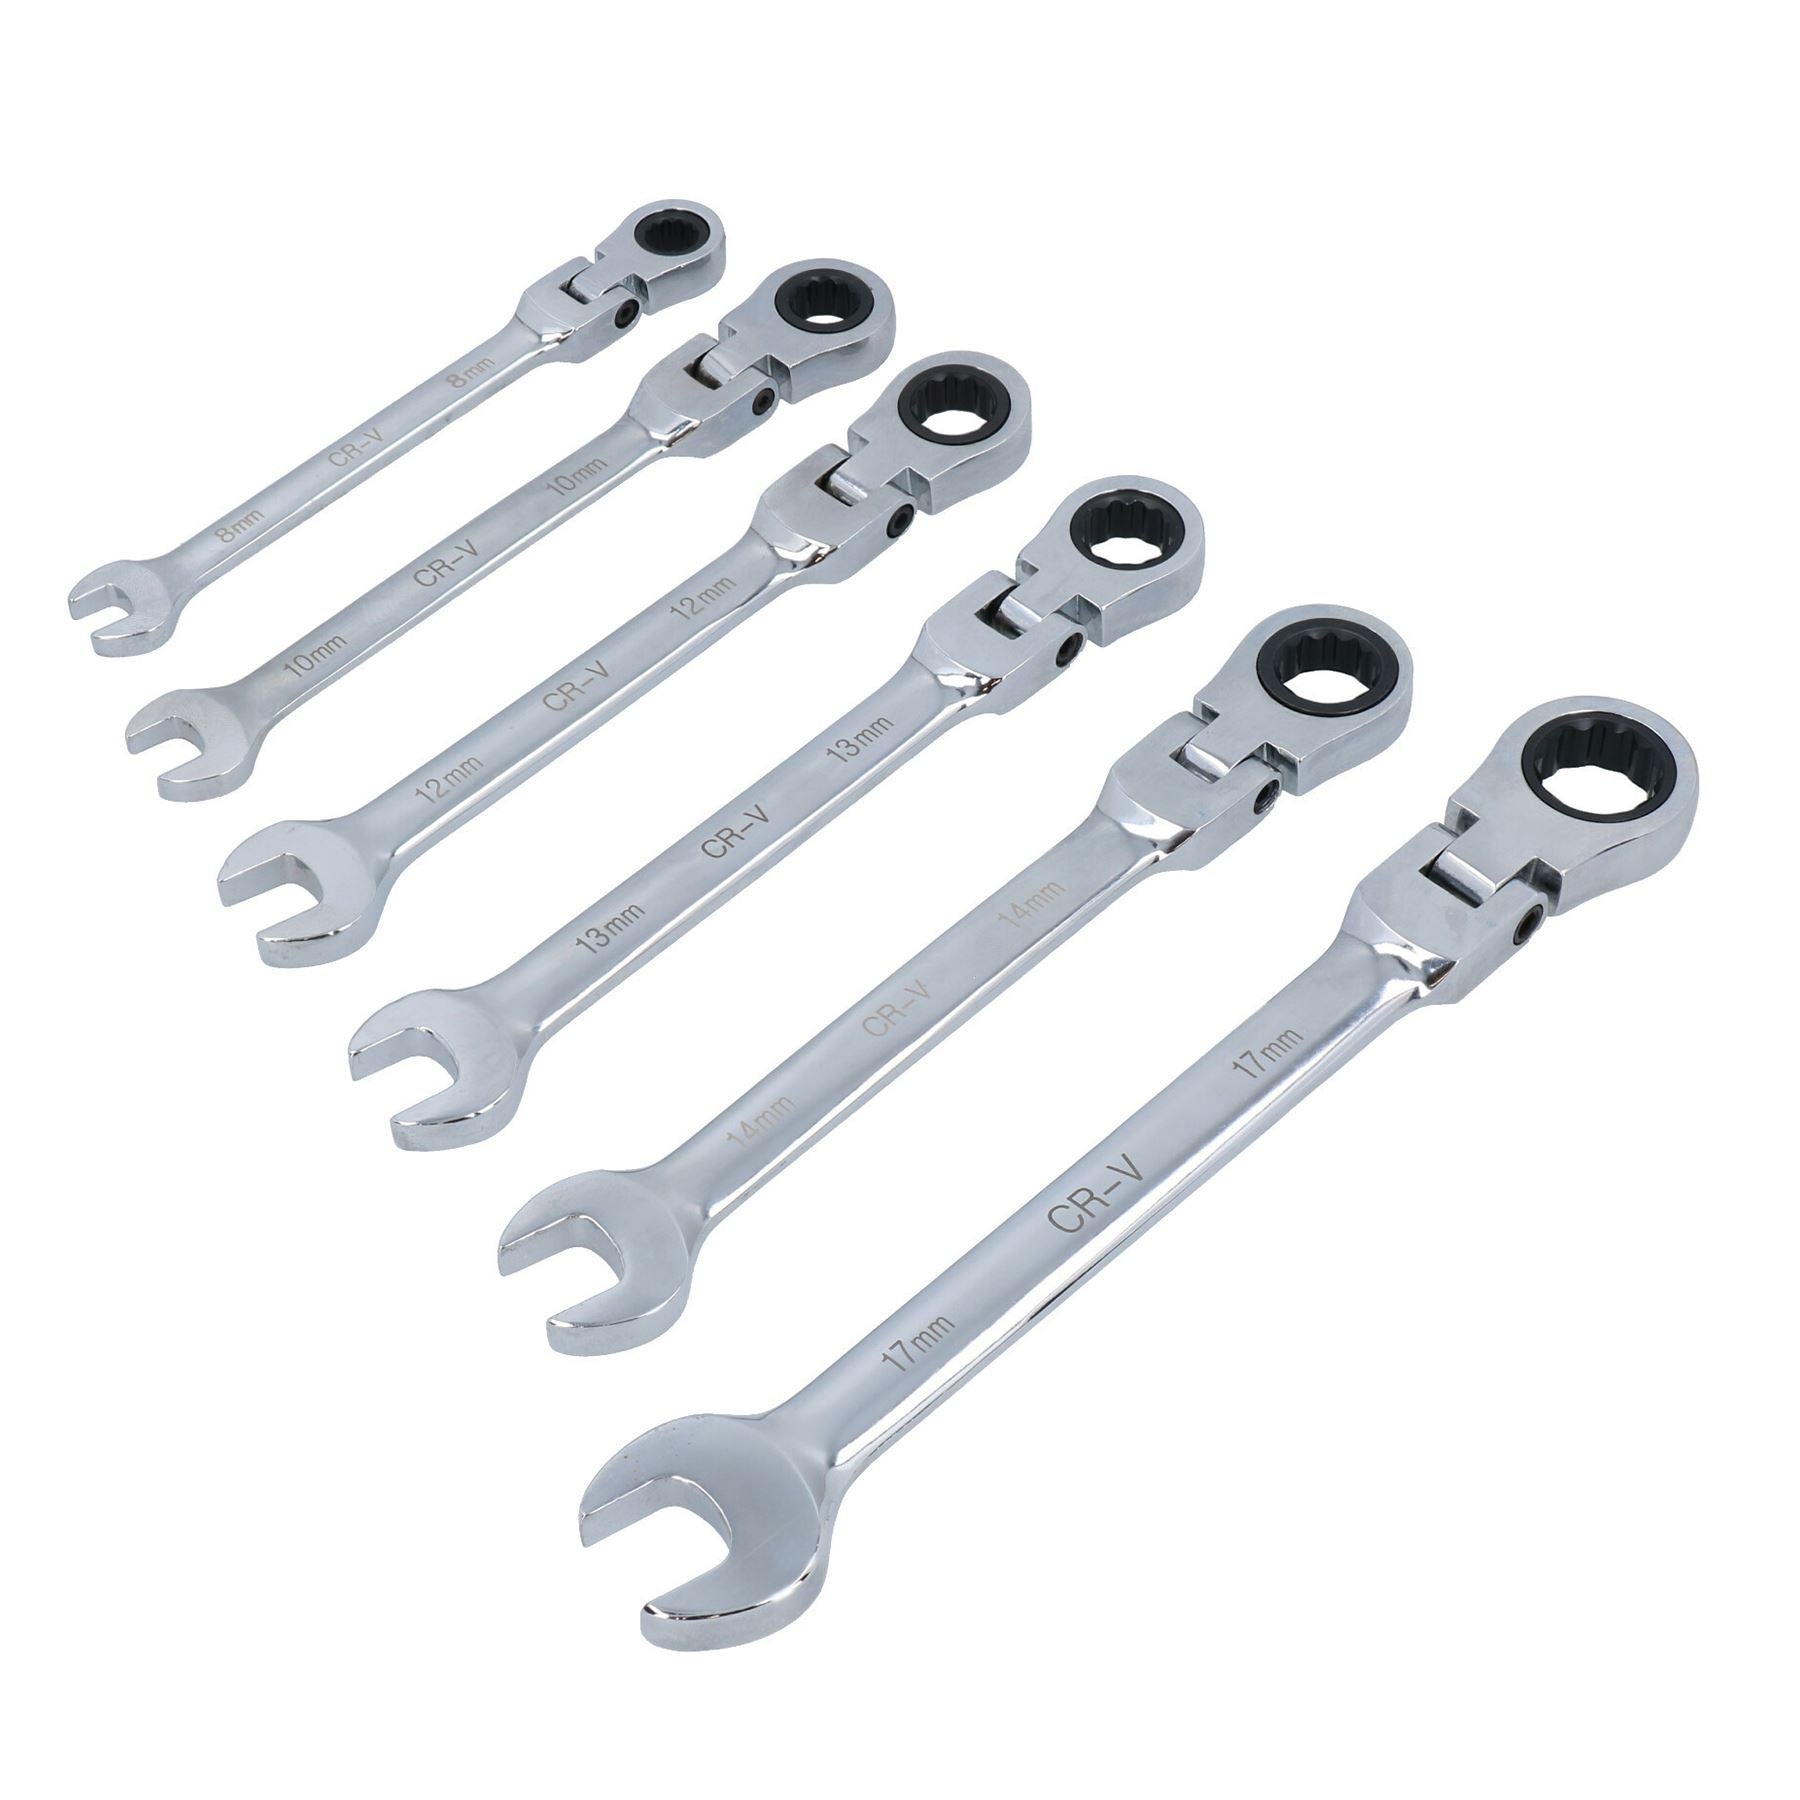 Professional Flexible Head Ratchet Spanners Wrench 6pc Set 8mm - 17mm